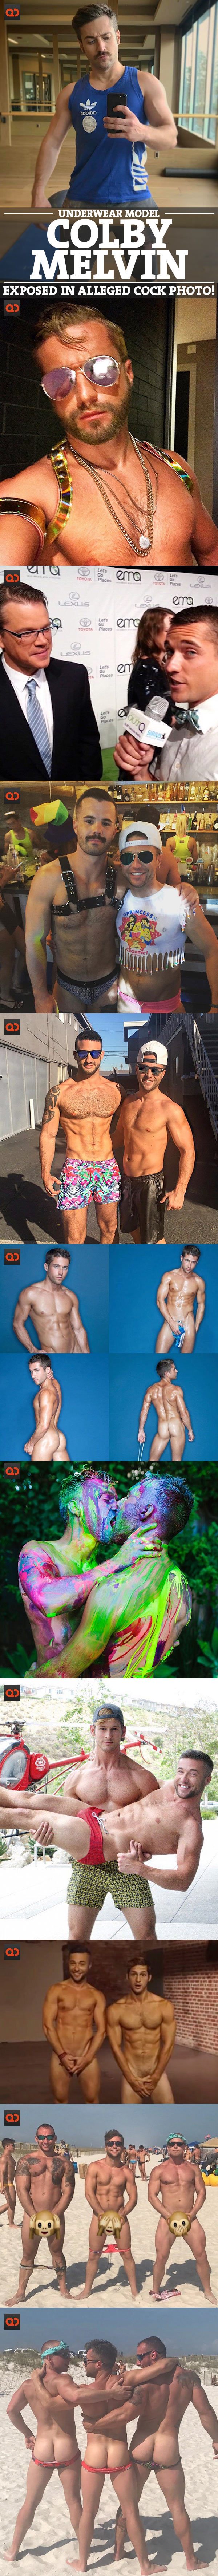 Colby Melvin, Underwear Model, Exposed In Alleged Cock Photo!